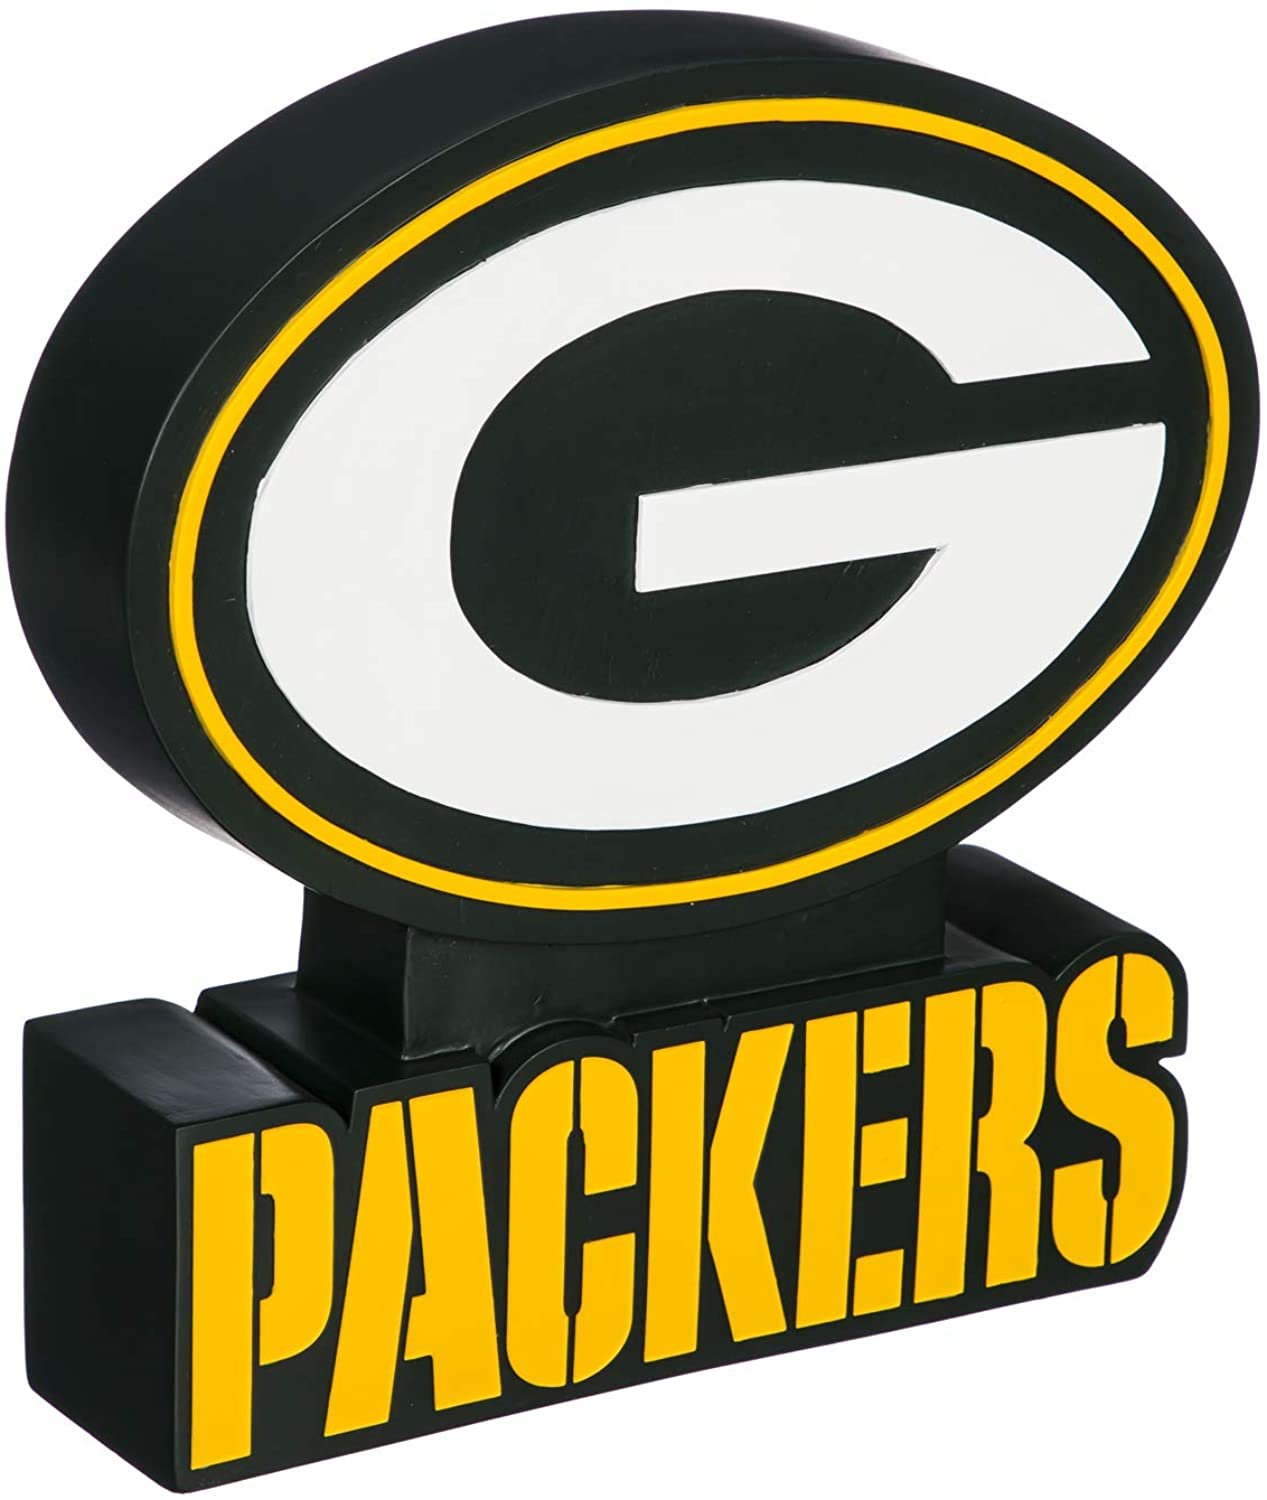 Green Bay Packers 12 Inch Mascot Tiki Totem Garden Statue Resin Outdoor Decoration